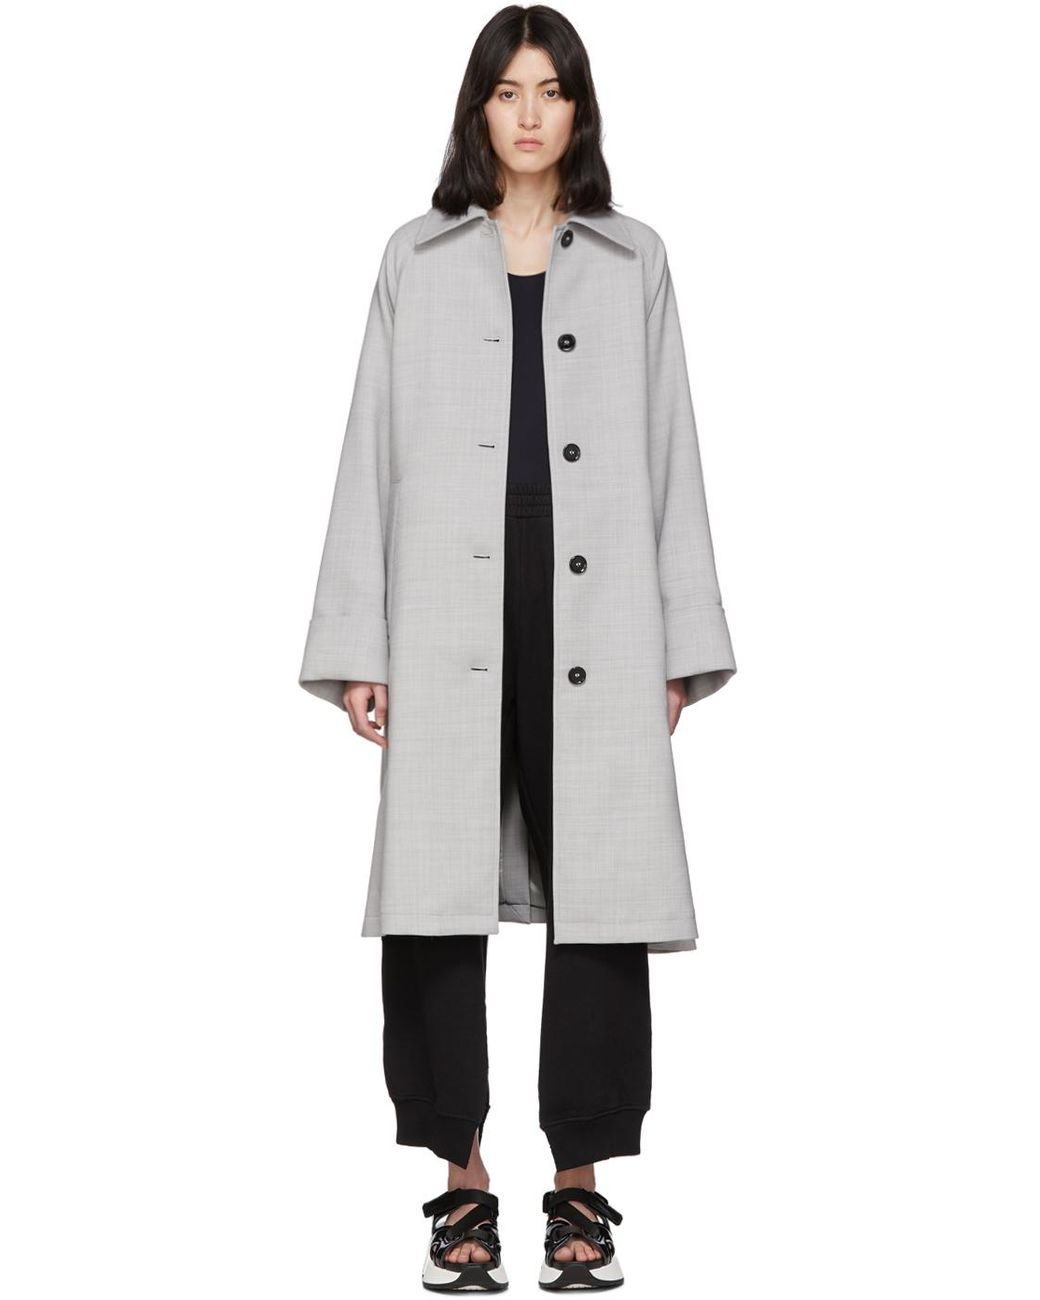 MM6 by Maison Martin Margiela Grey Wool Trench Coat in Gray - Lyst